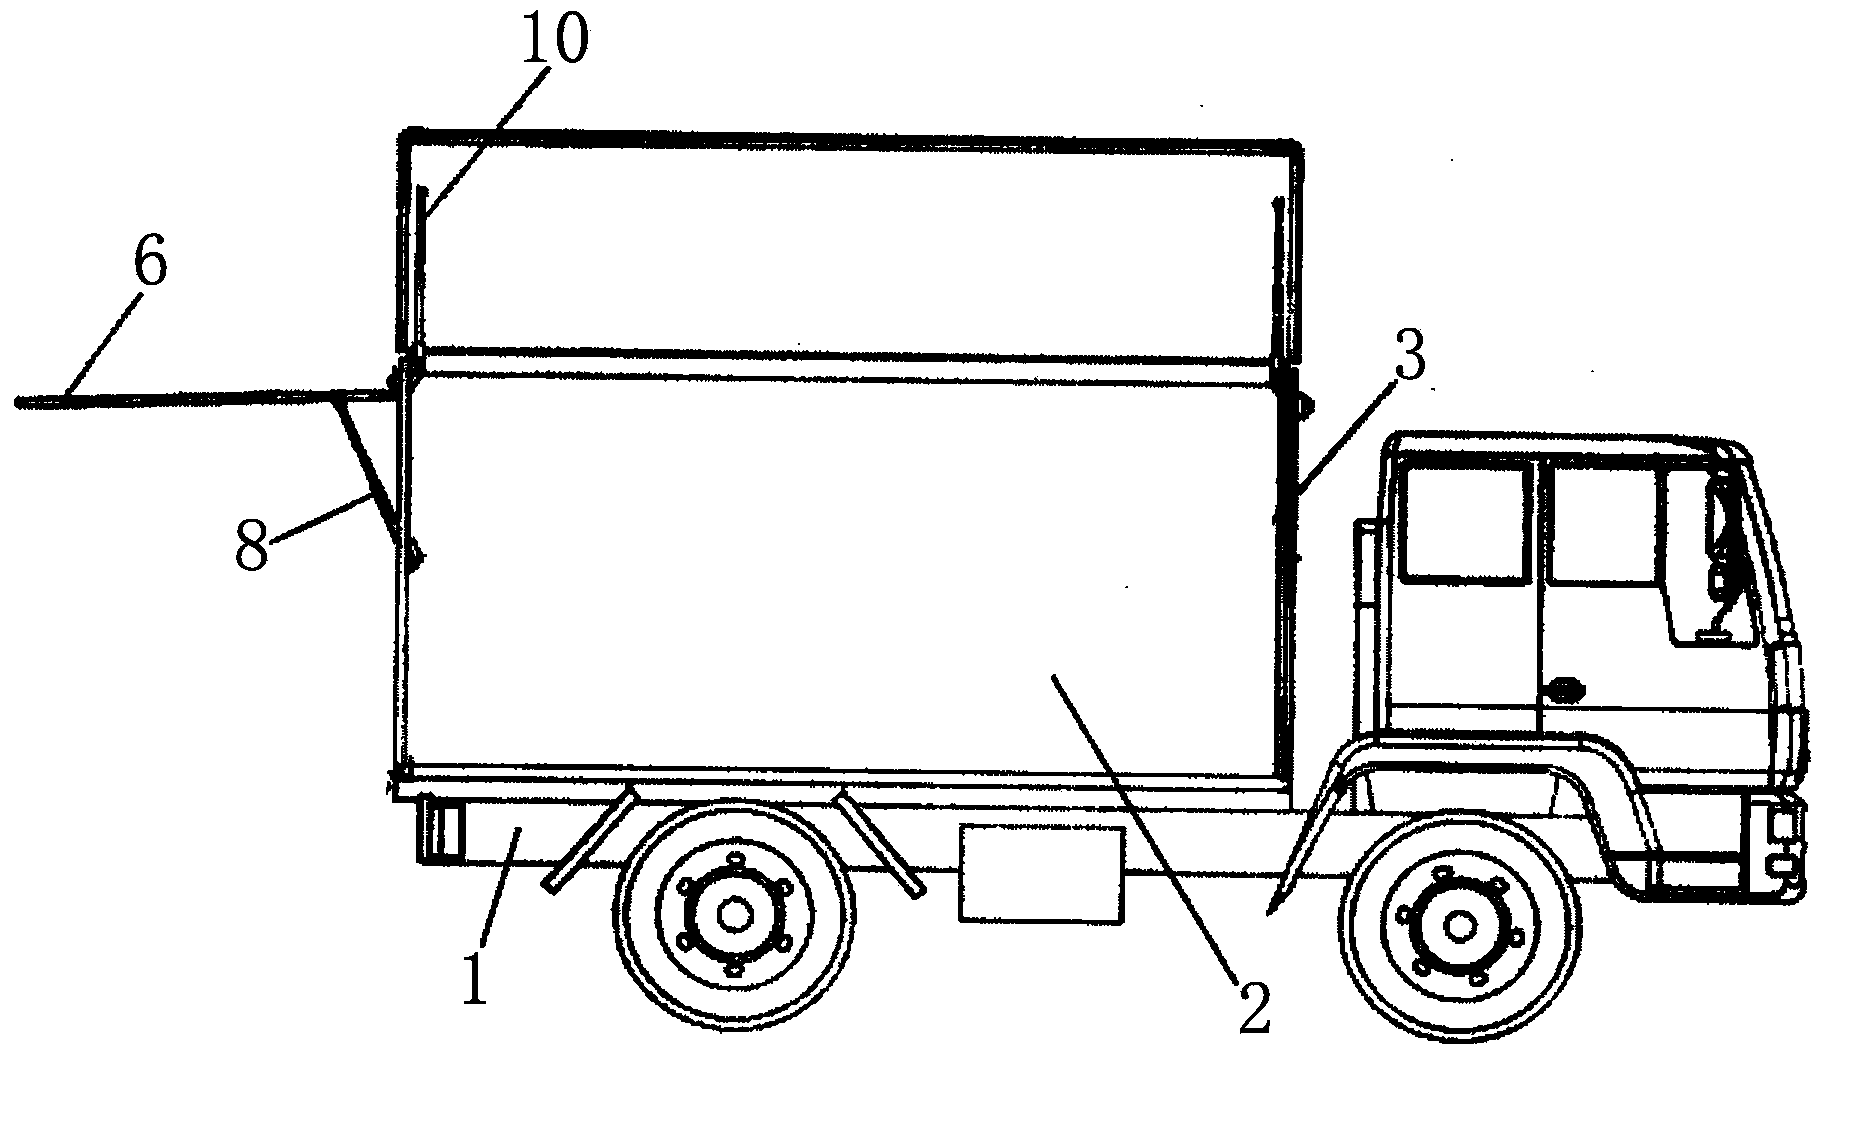 Novel electric push rod type wing carrier vehicle